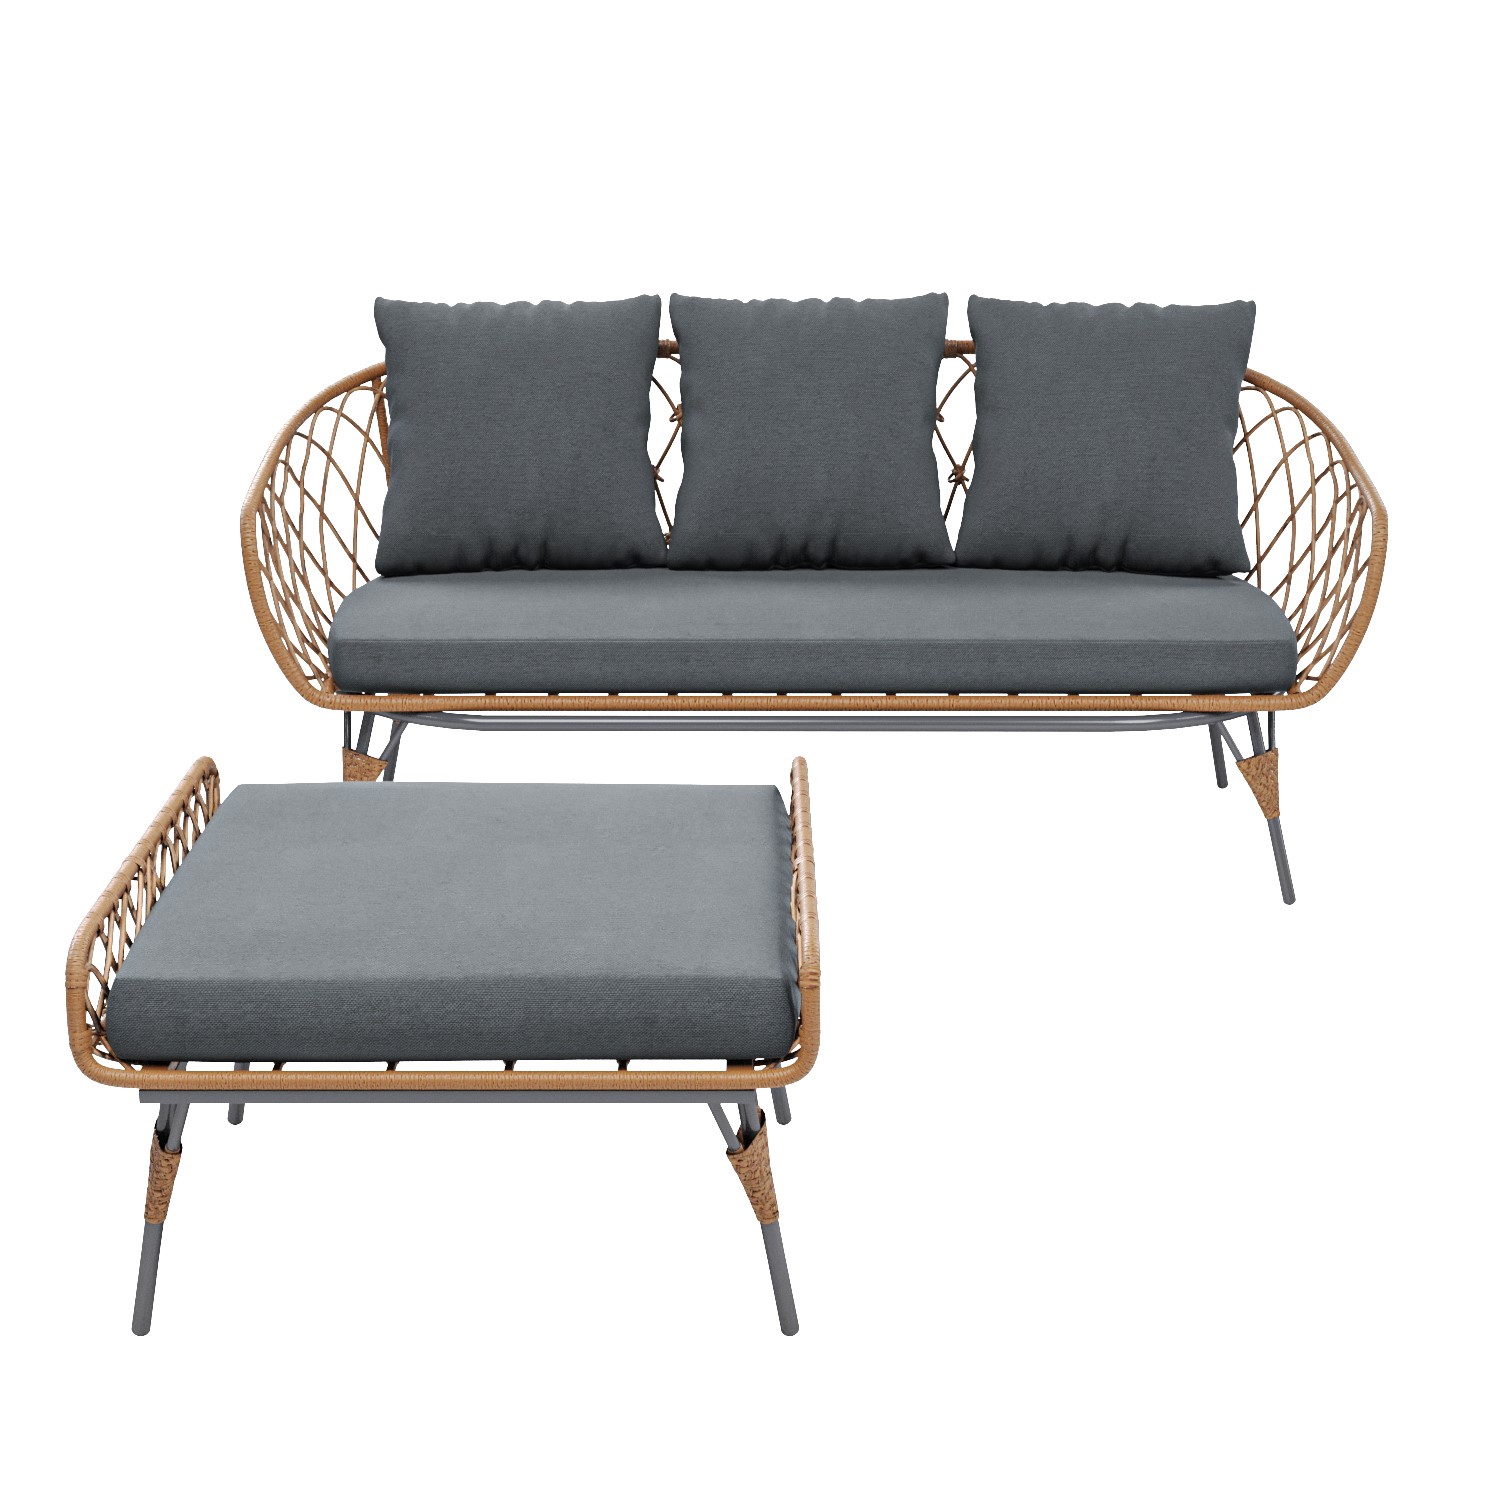 Read more about 3 seater rattan garden sofa set with footstool como